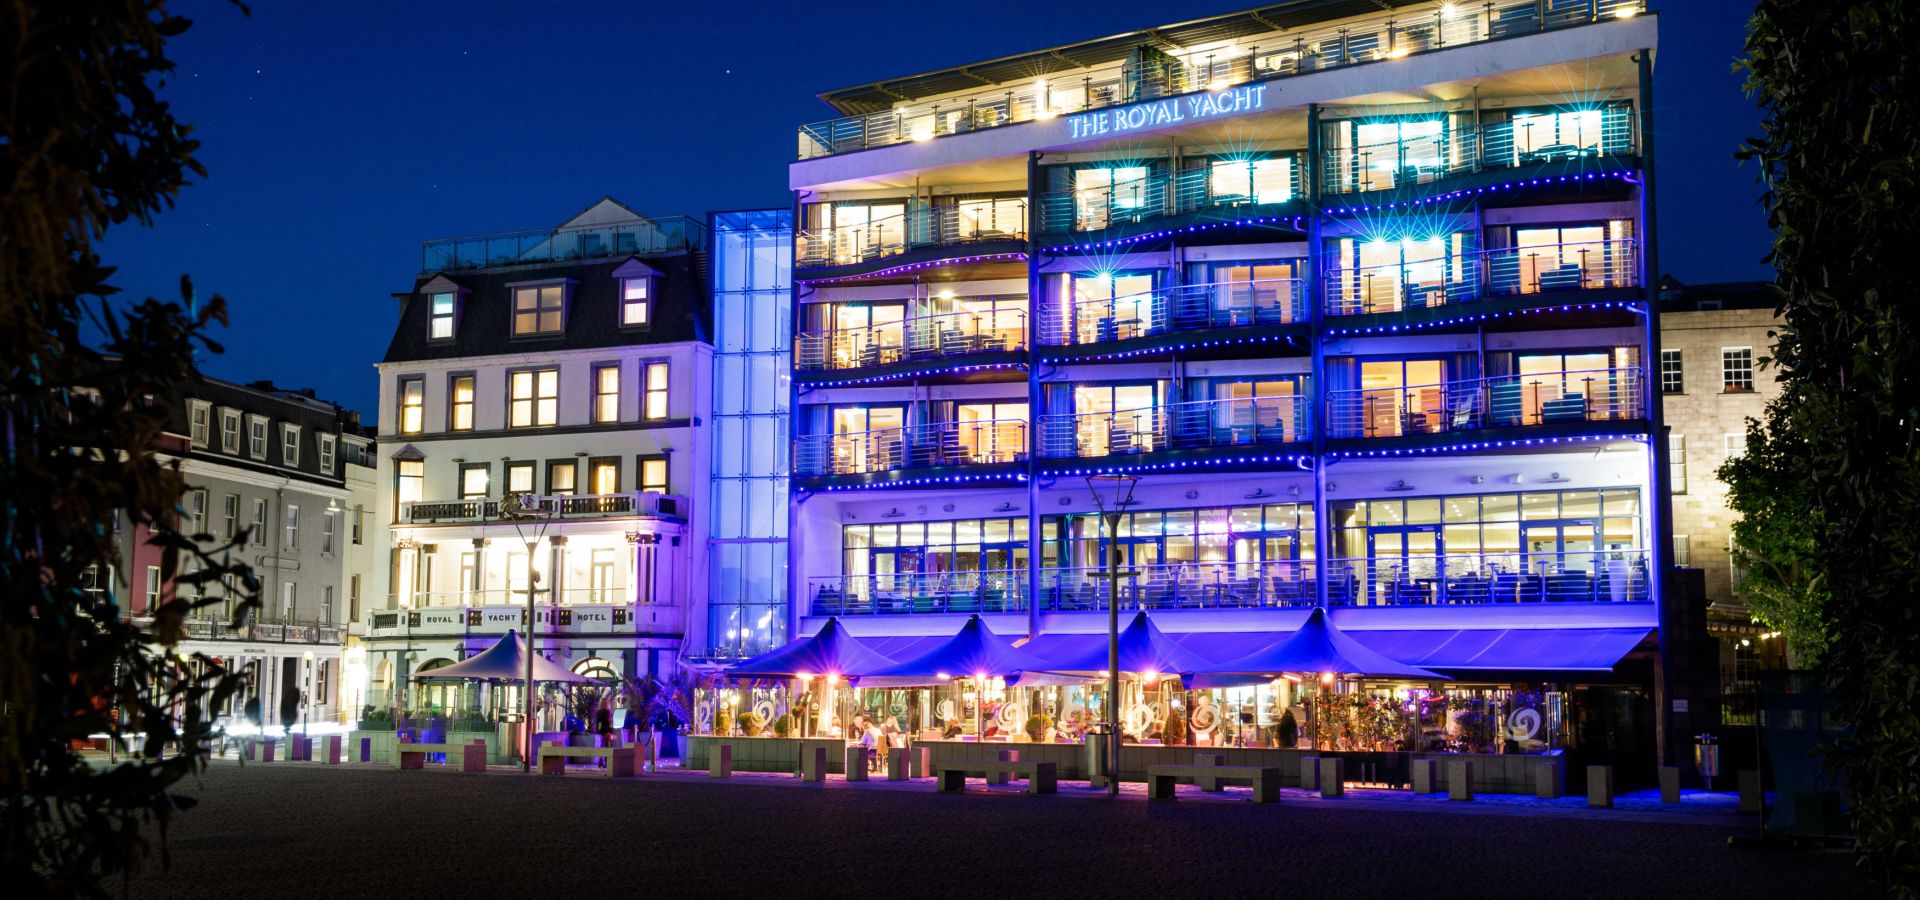 the royal yacht club hotel jersey